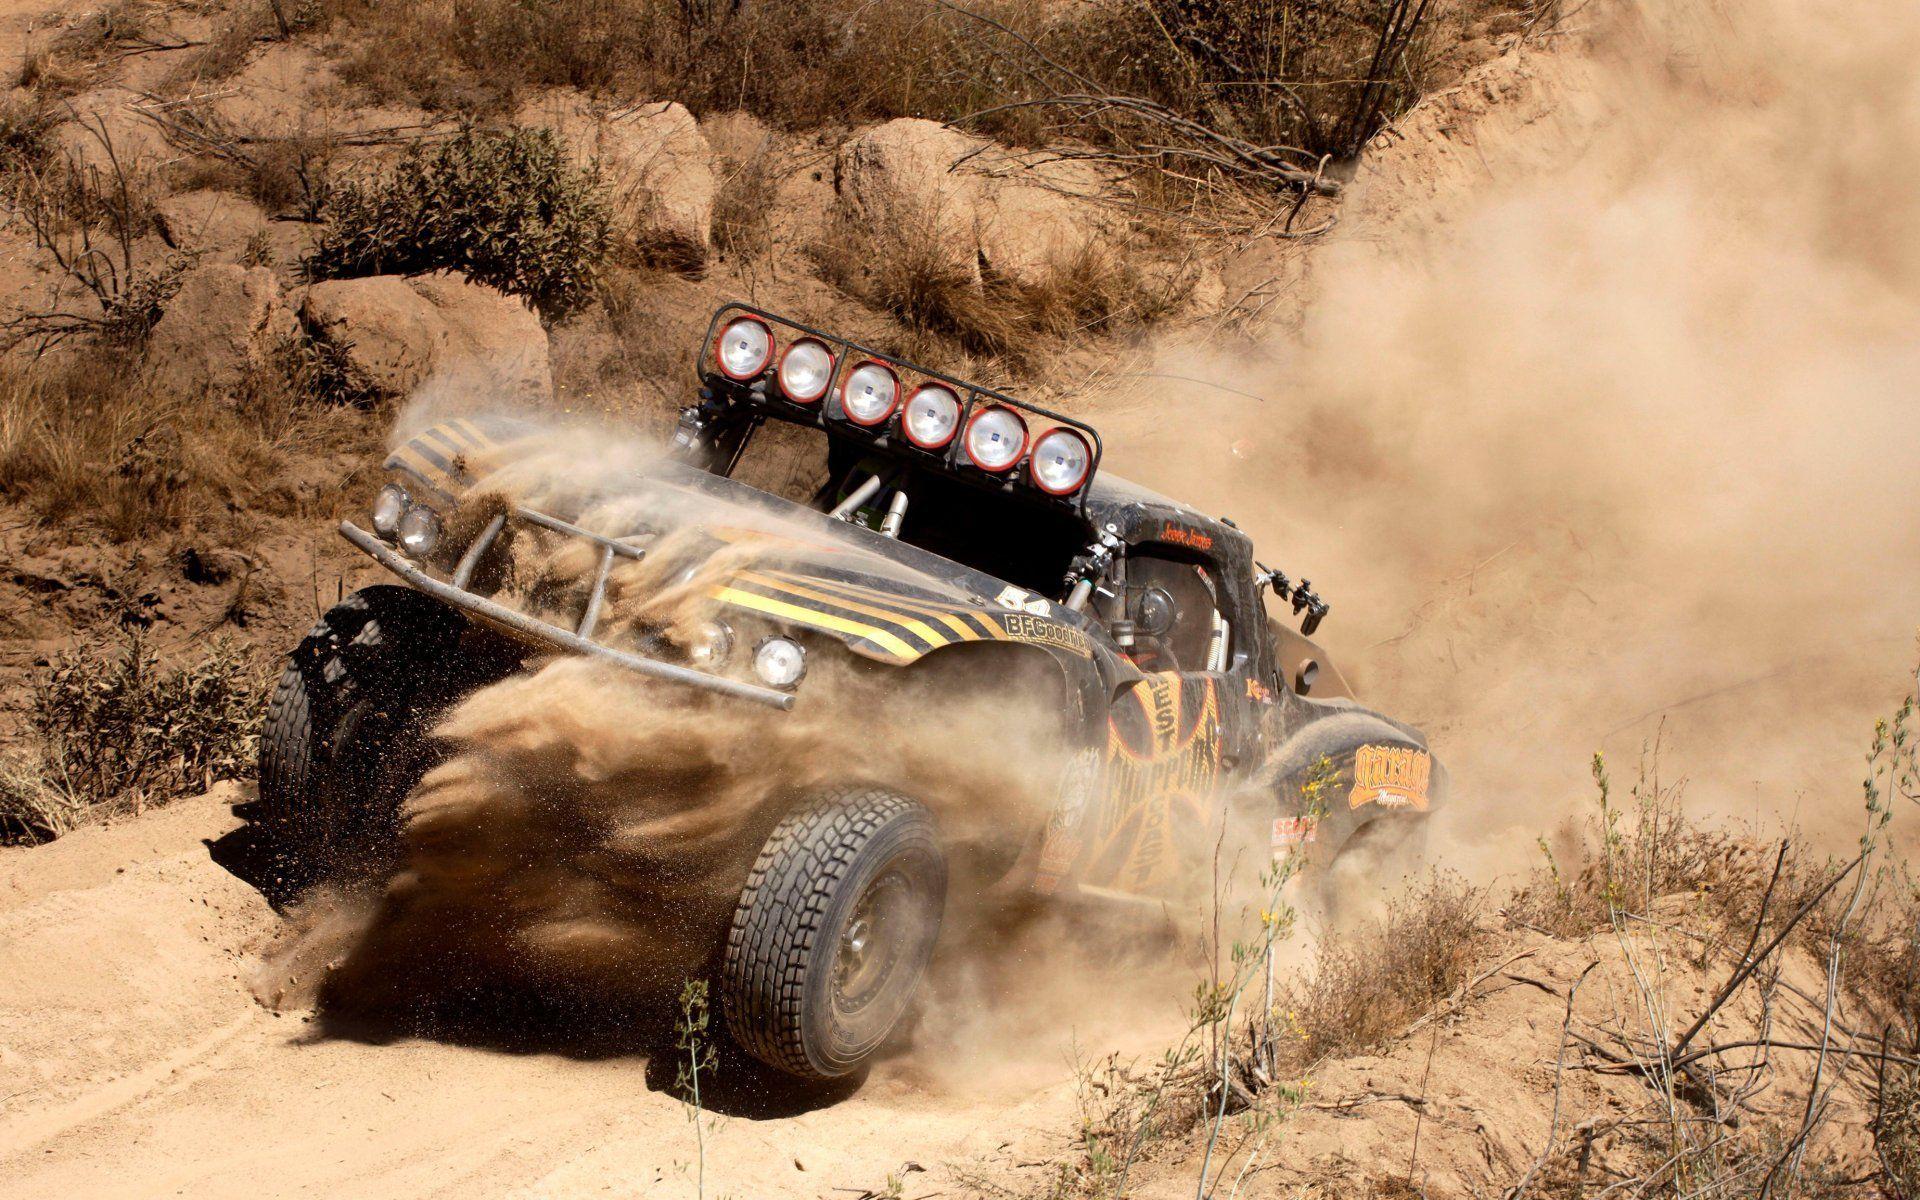 Chevy trophy truck jeep suv race rally desert california